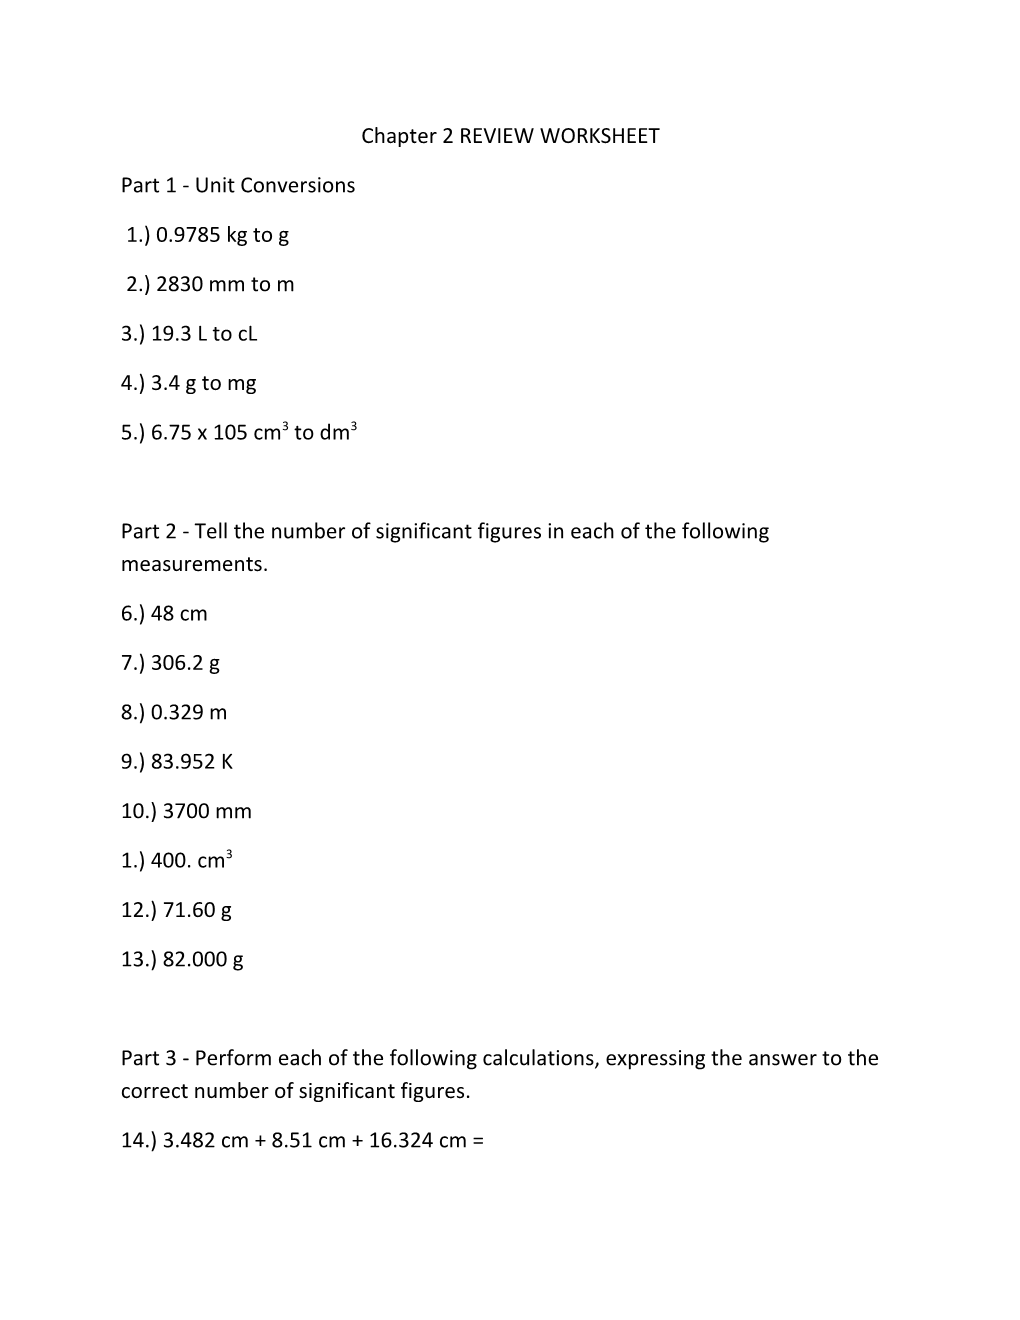 Part 2 - Tell the Number of Significant Figures in Each of the Following Measurements